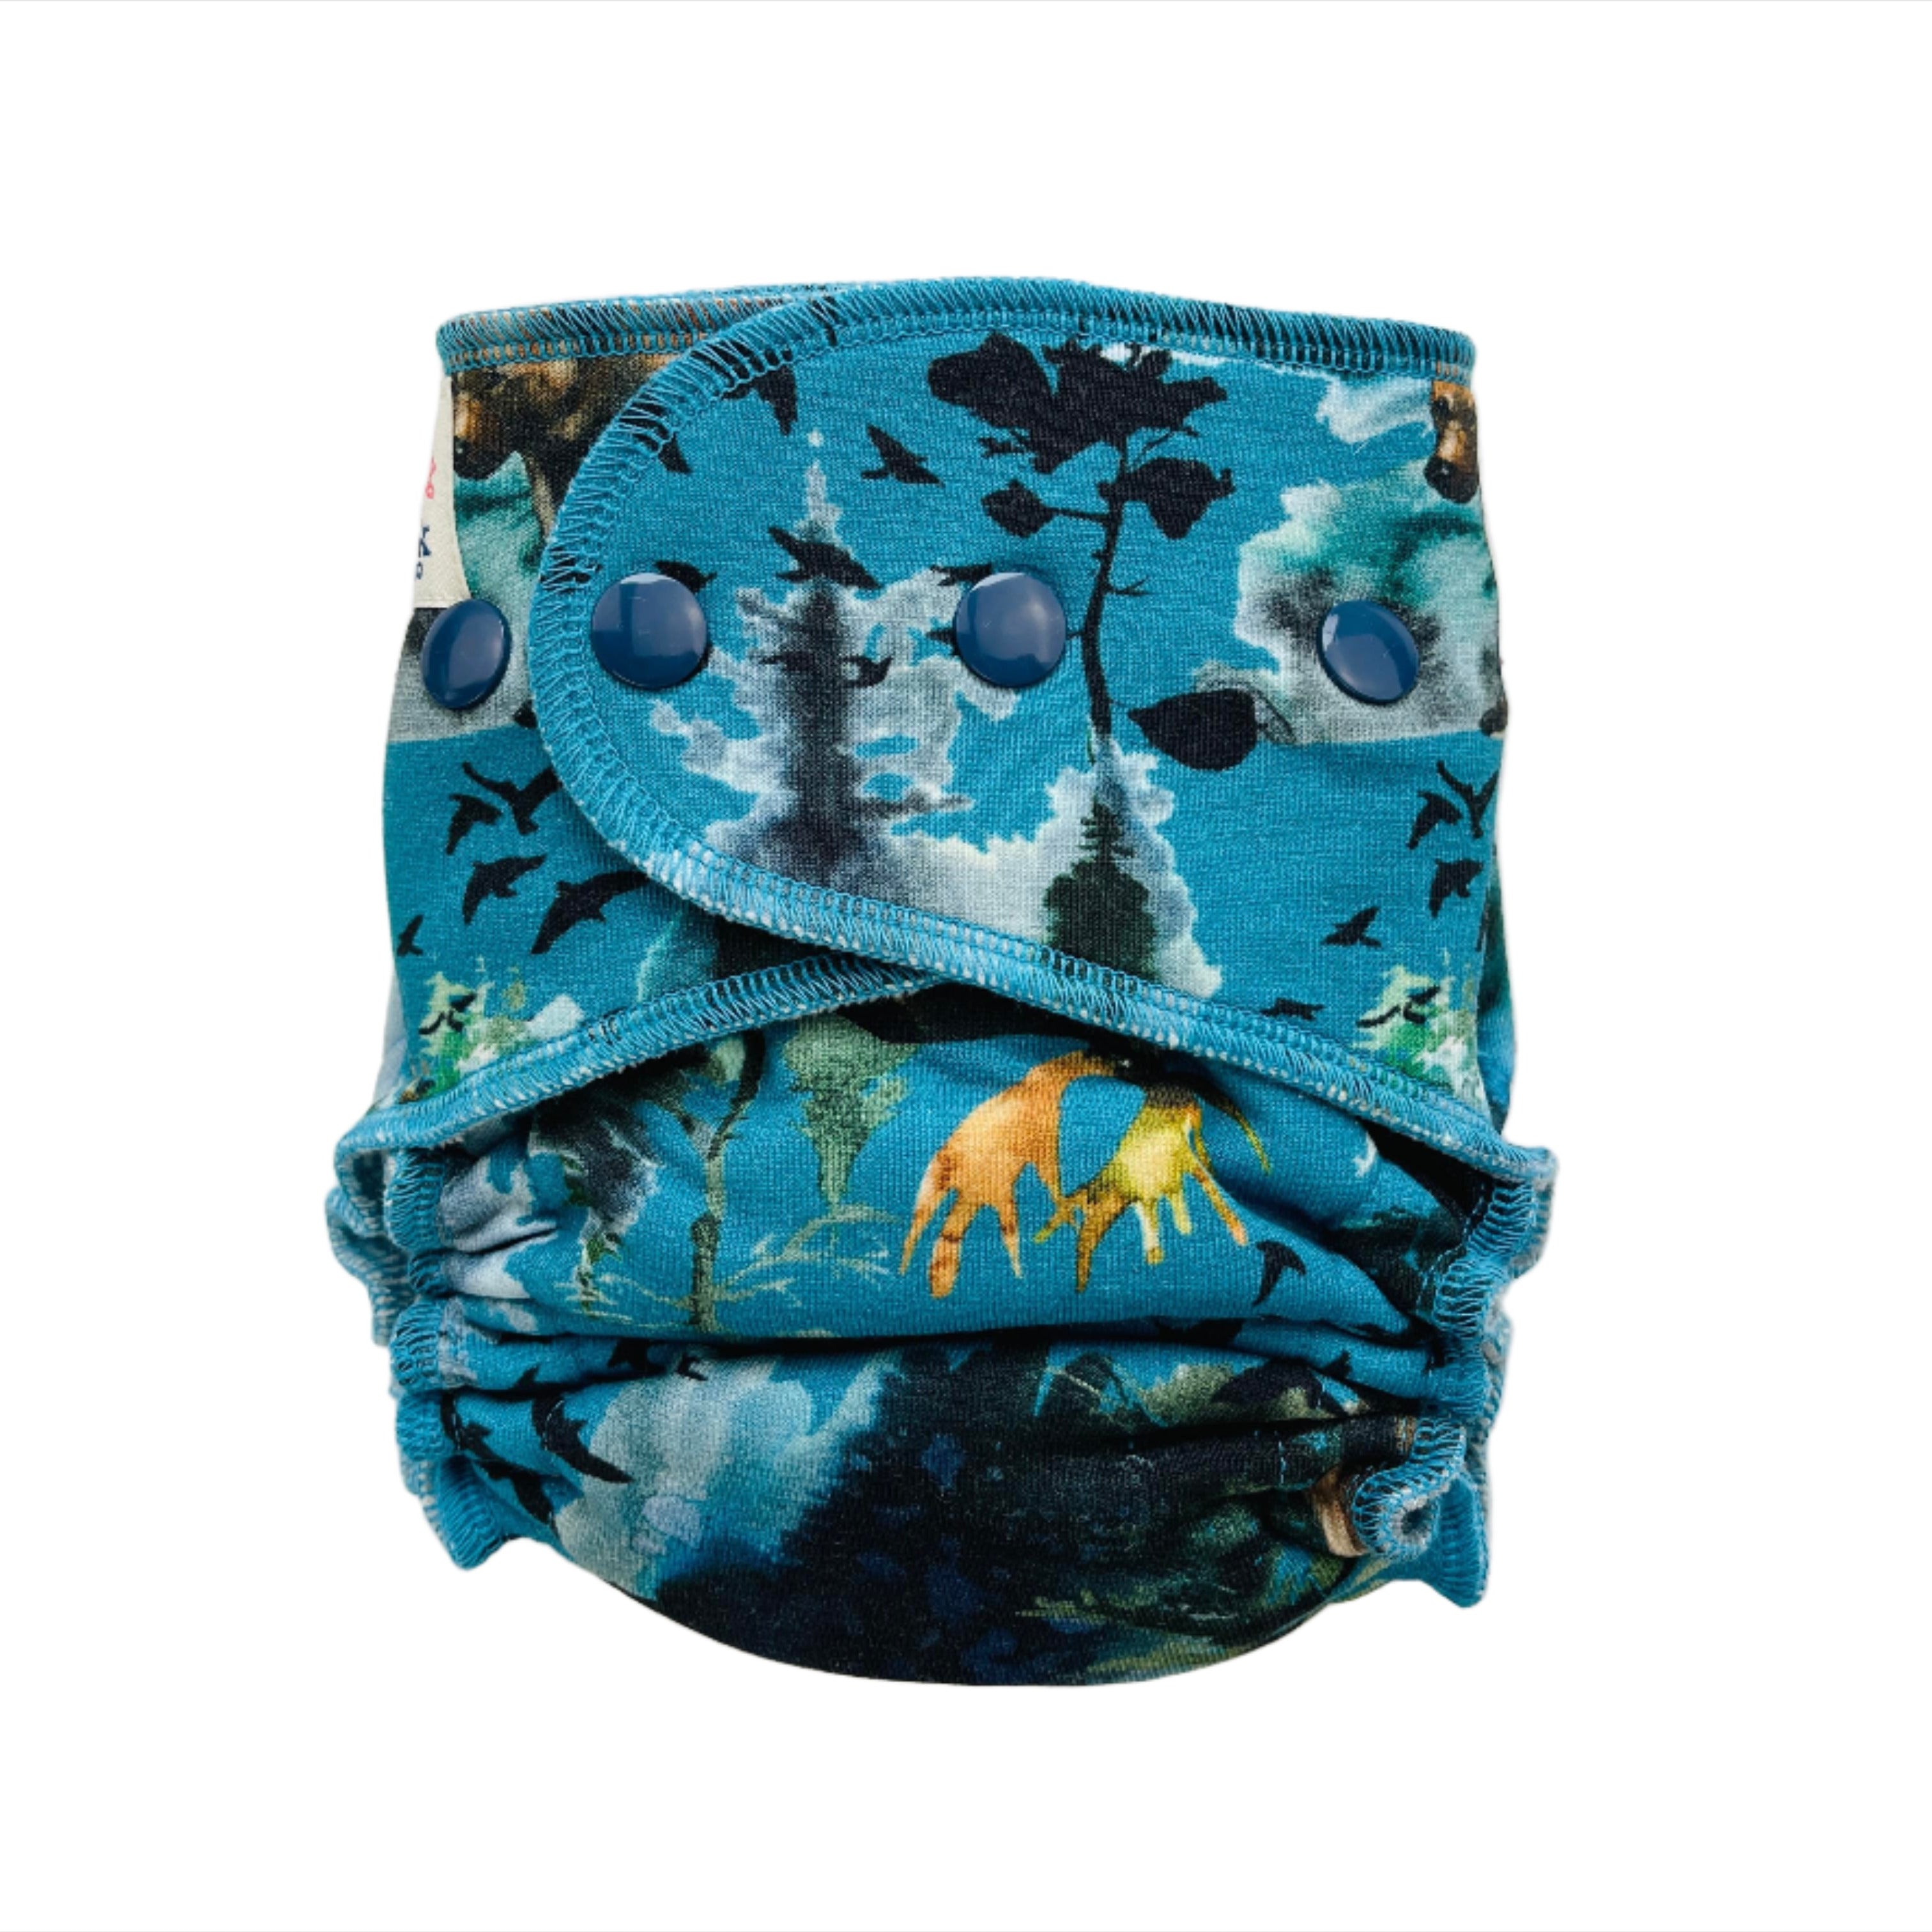 Lilly & Frank Petite Cloth Diaper Watercolour Woods Petite Cloth Diaper - Fitted - Classic Serged